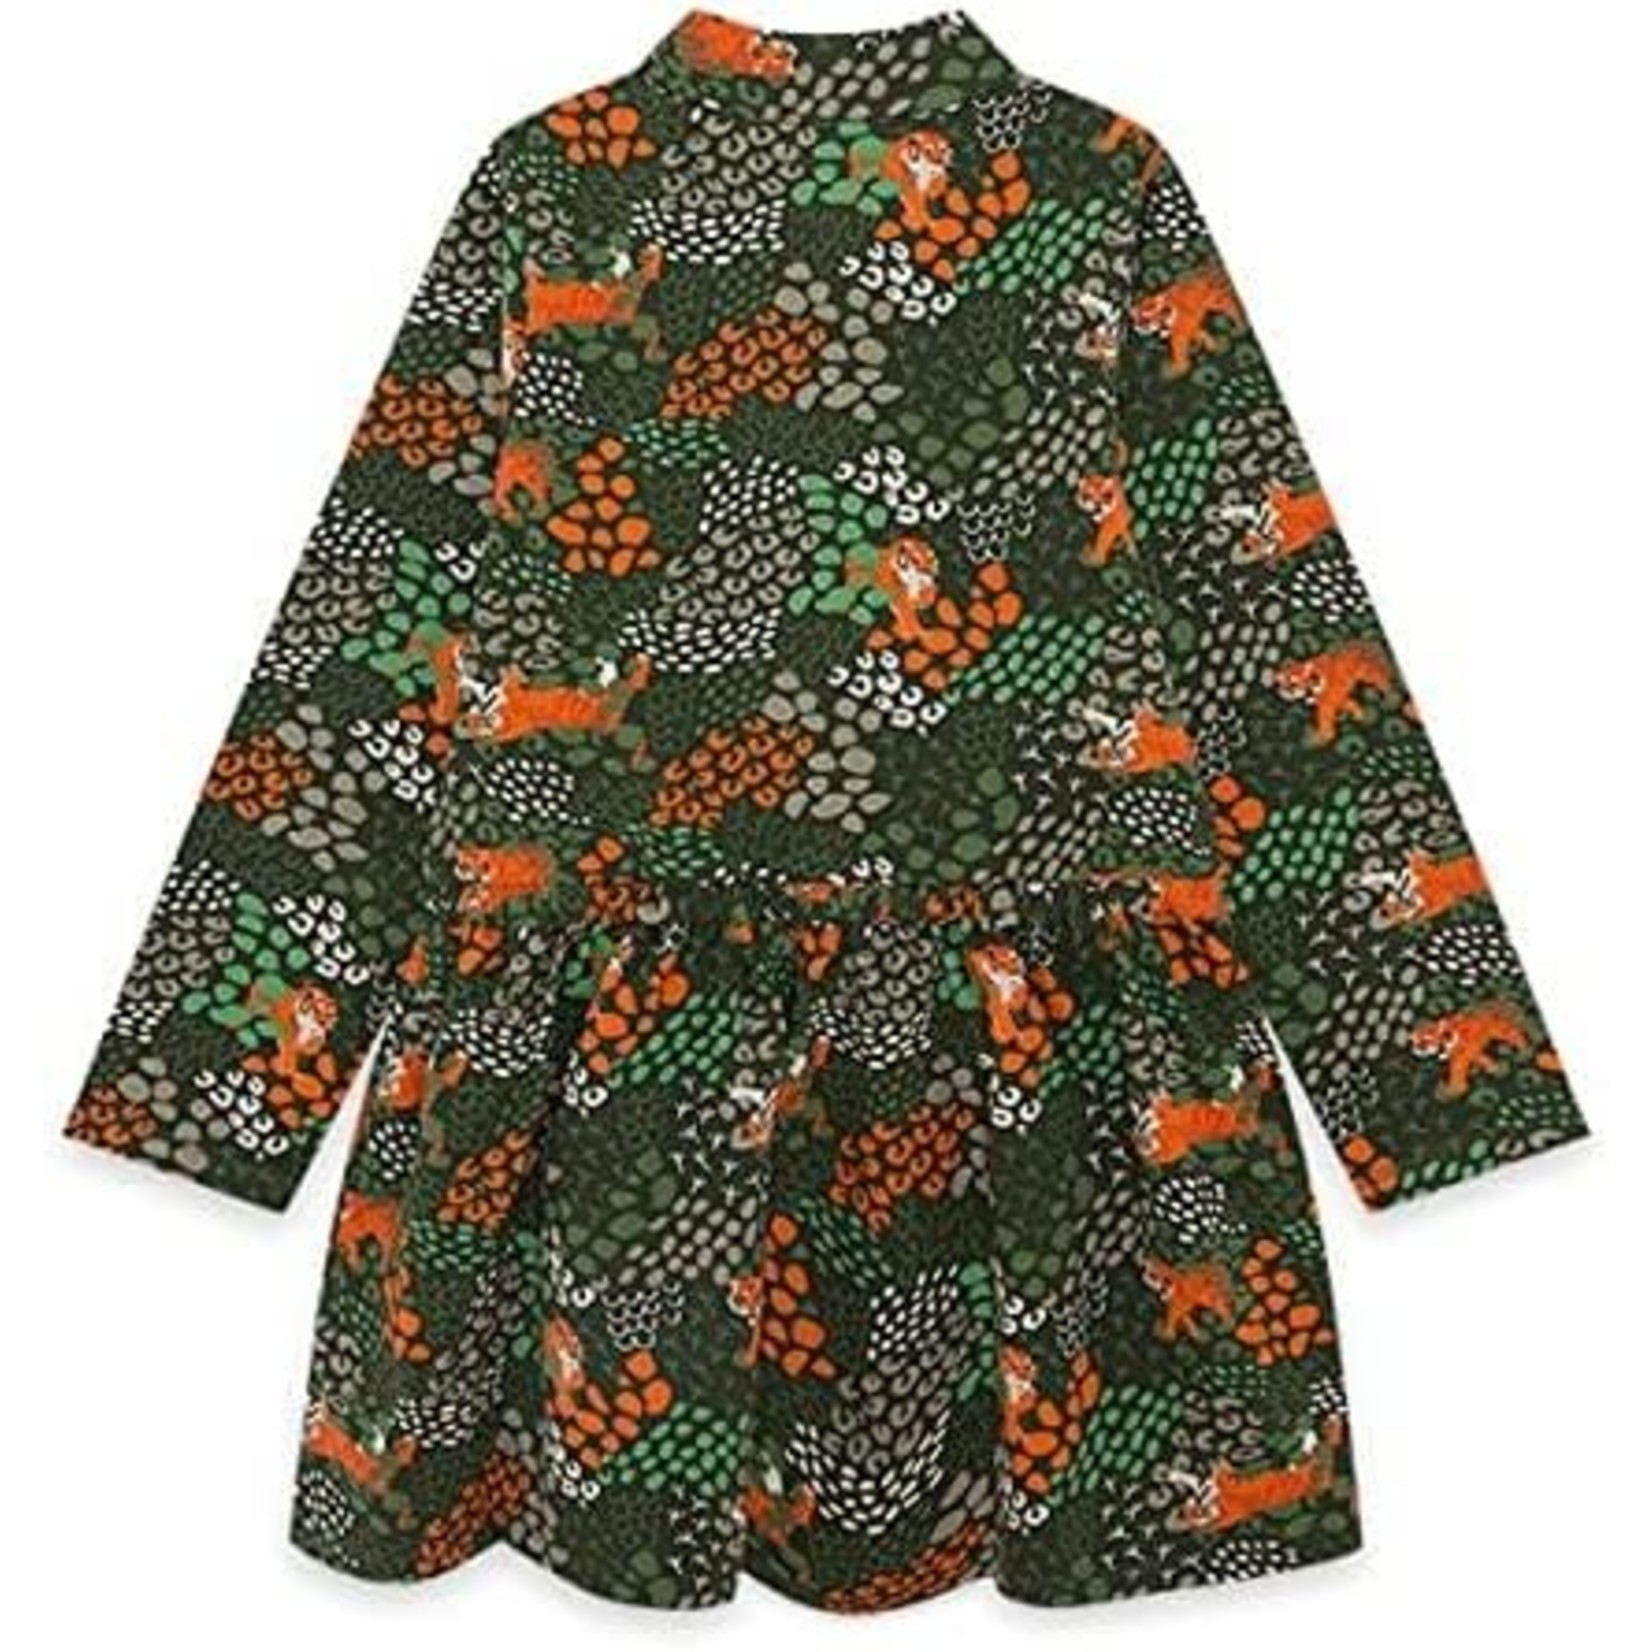 TucTuc TUC TUC - Green jersey dress with orange spots 'Wild Soul' - Size 7 years